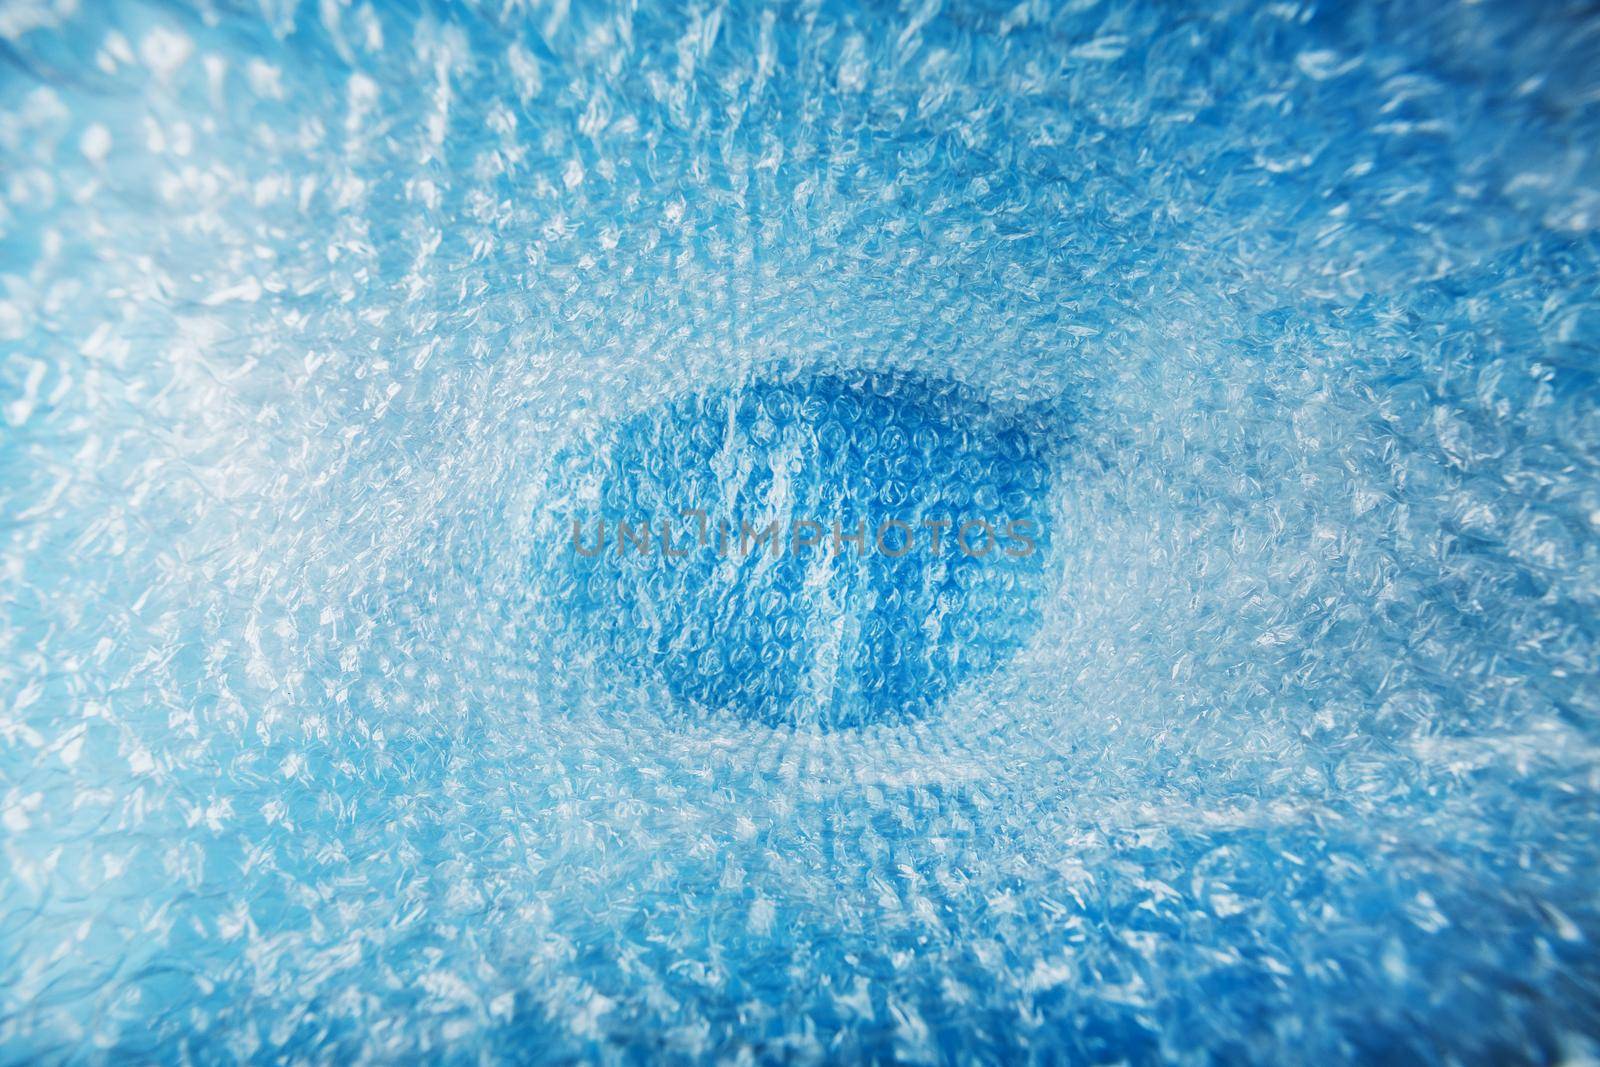 Full screen view of the inside of the package from the packaging air-bubble film on a blue background